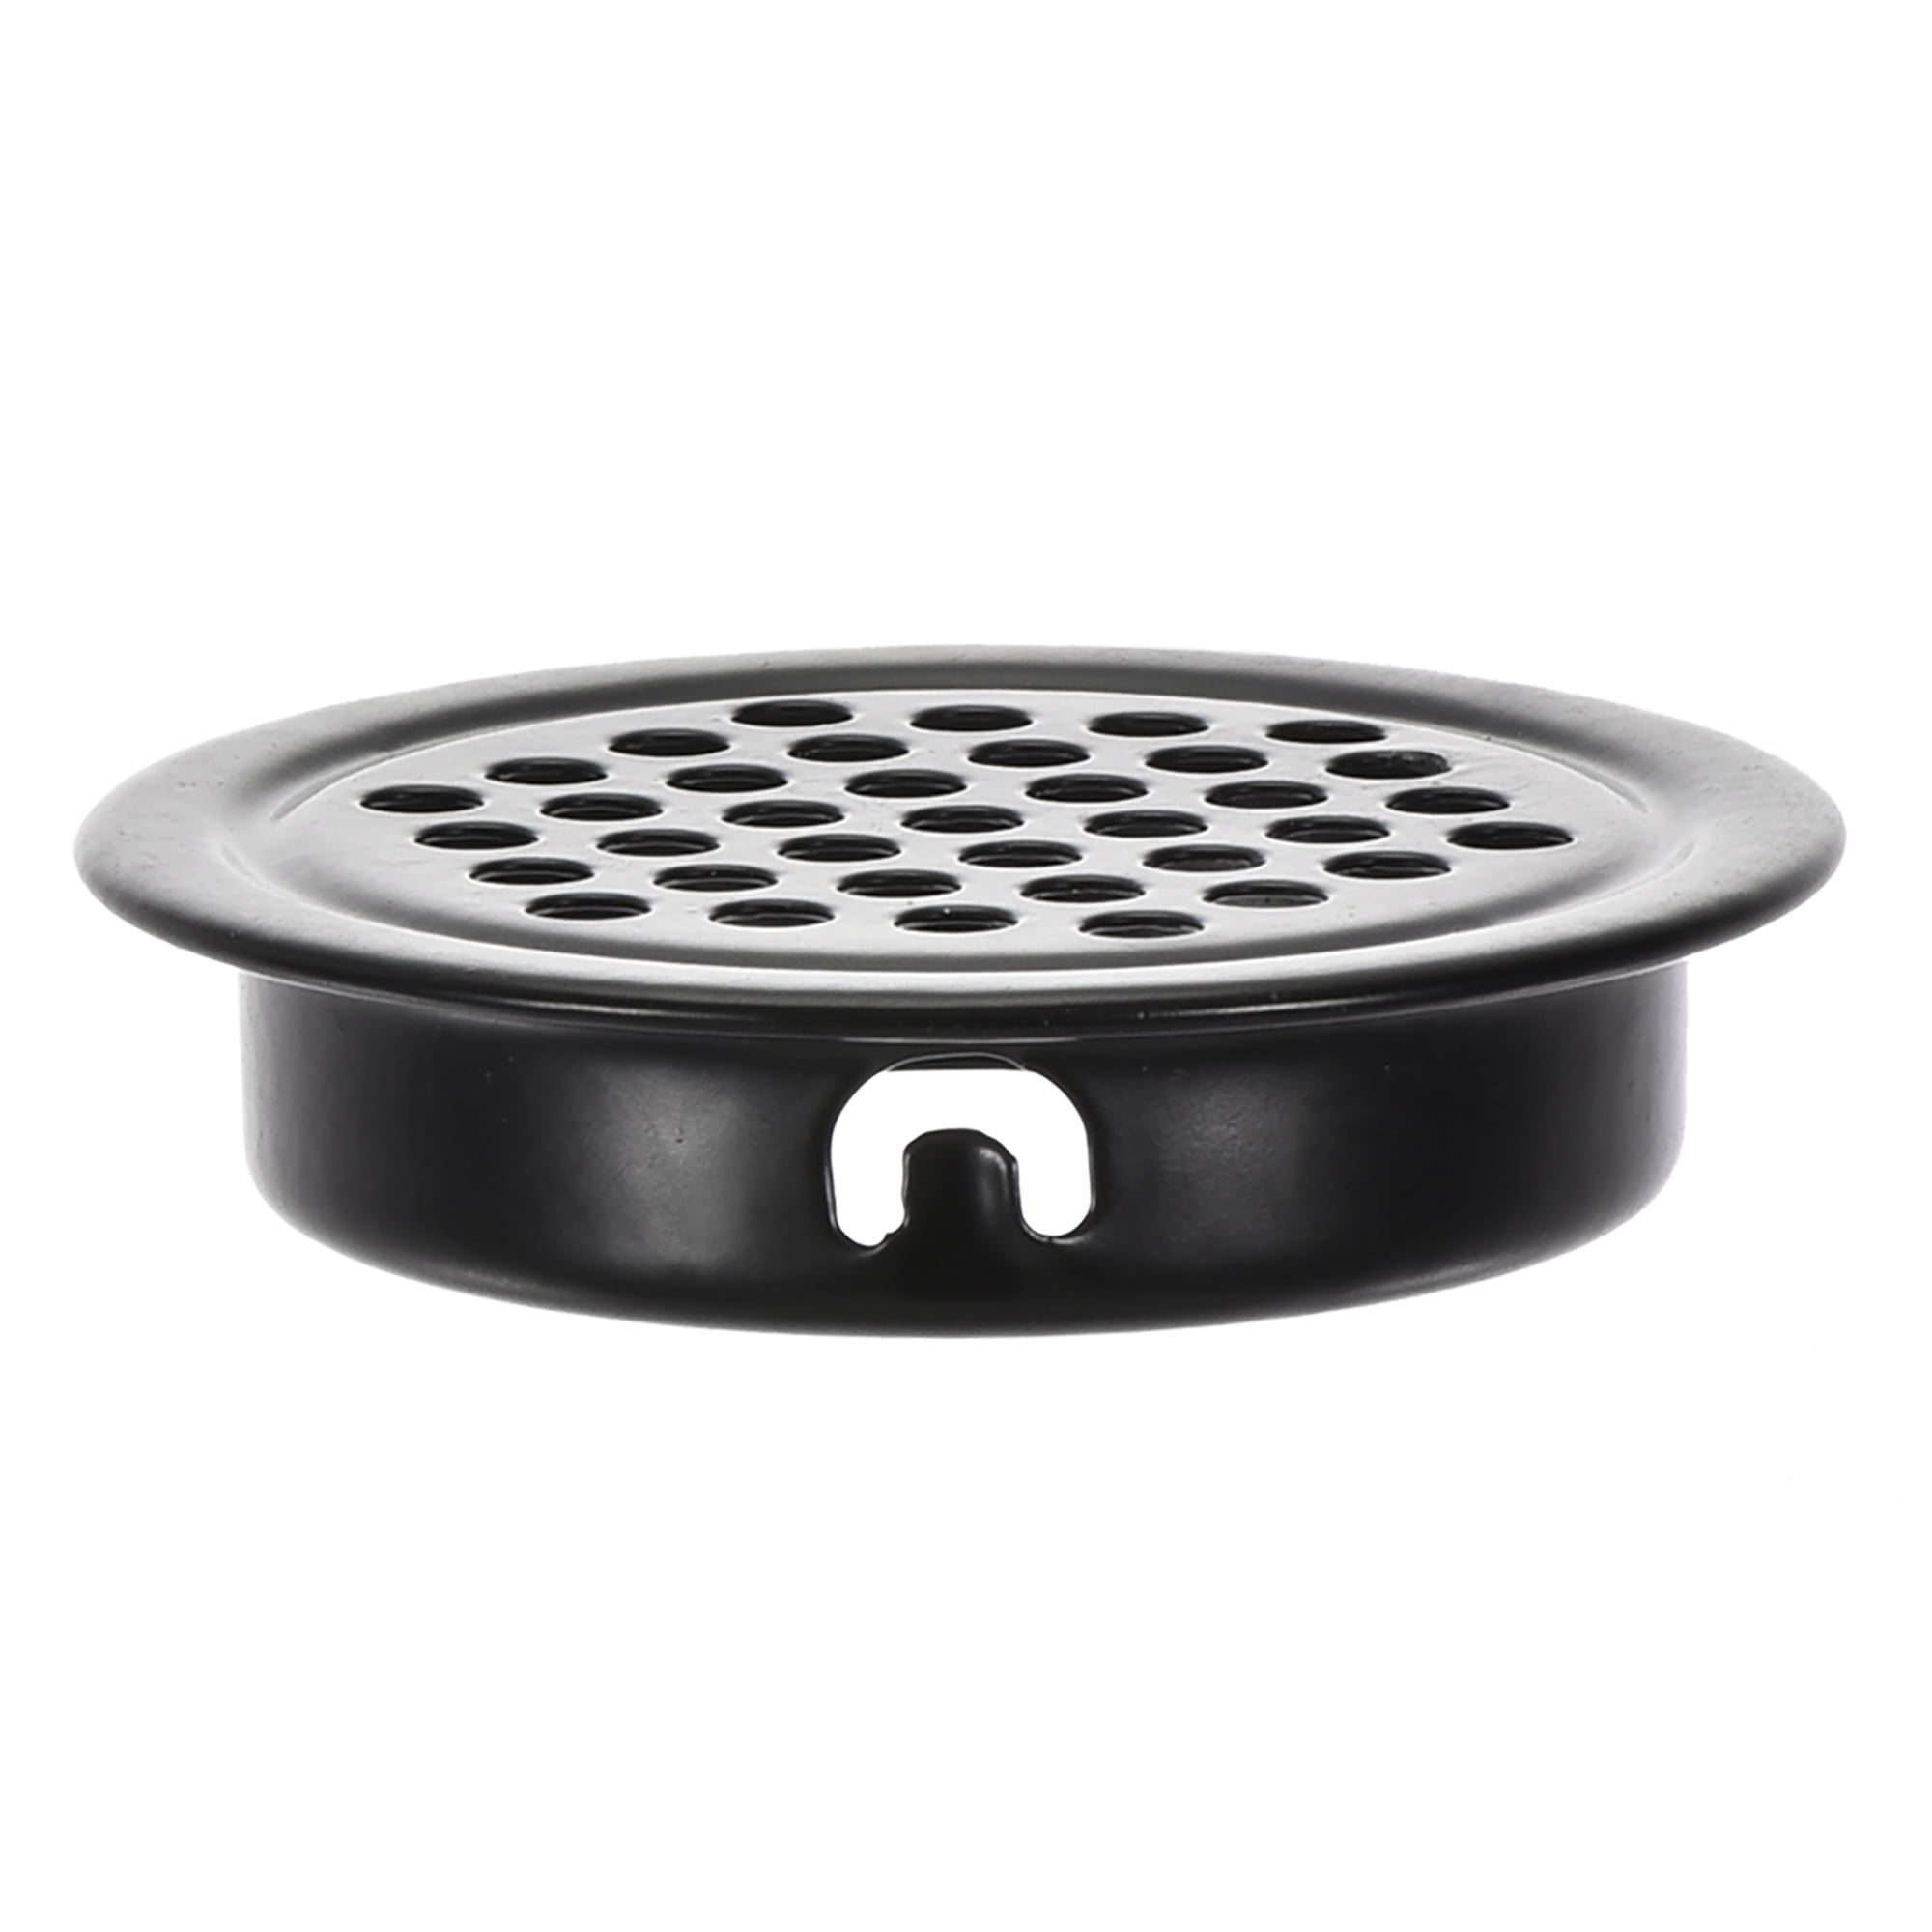 20 PCS Air Vents 1 inch Circular Vent Louver Black Stainless Steel Round Mesh Hole for Kitchen Bathroom Cabinet Cupboards Shoebox